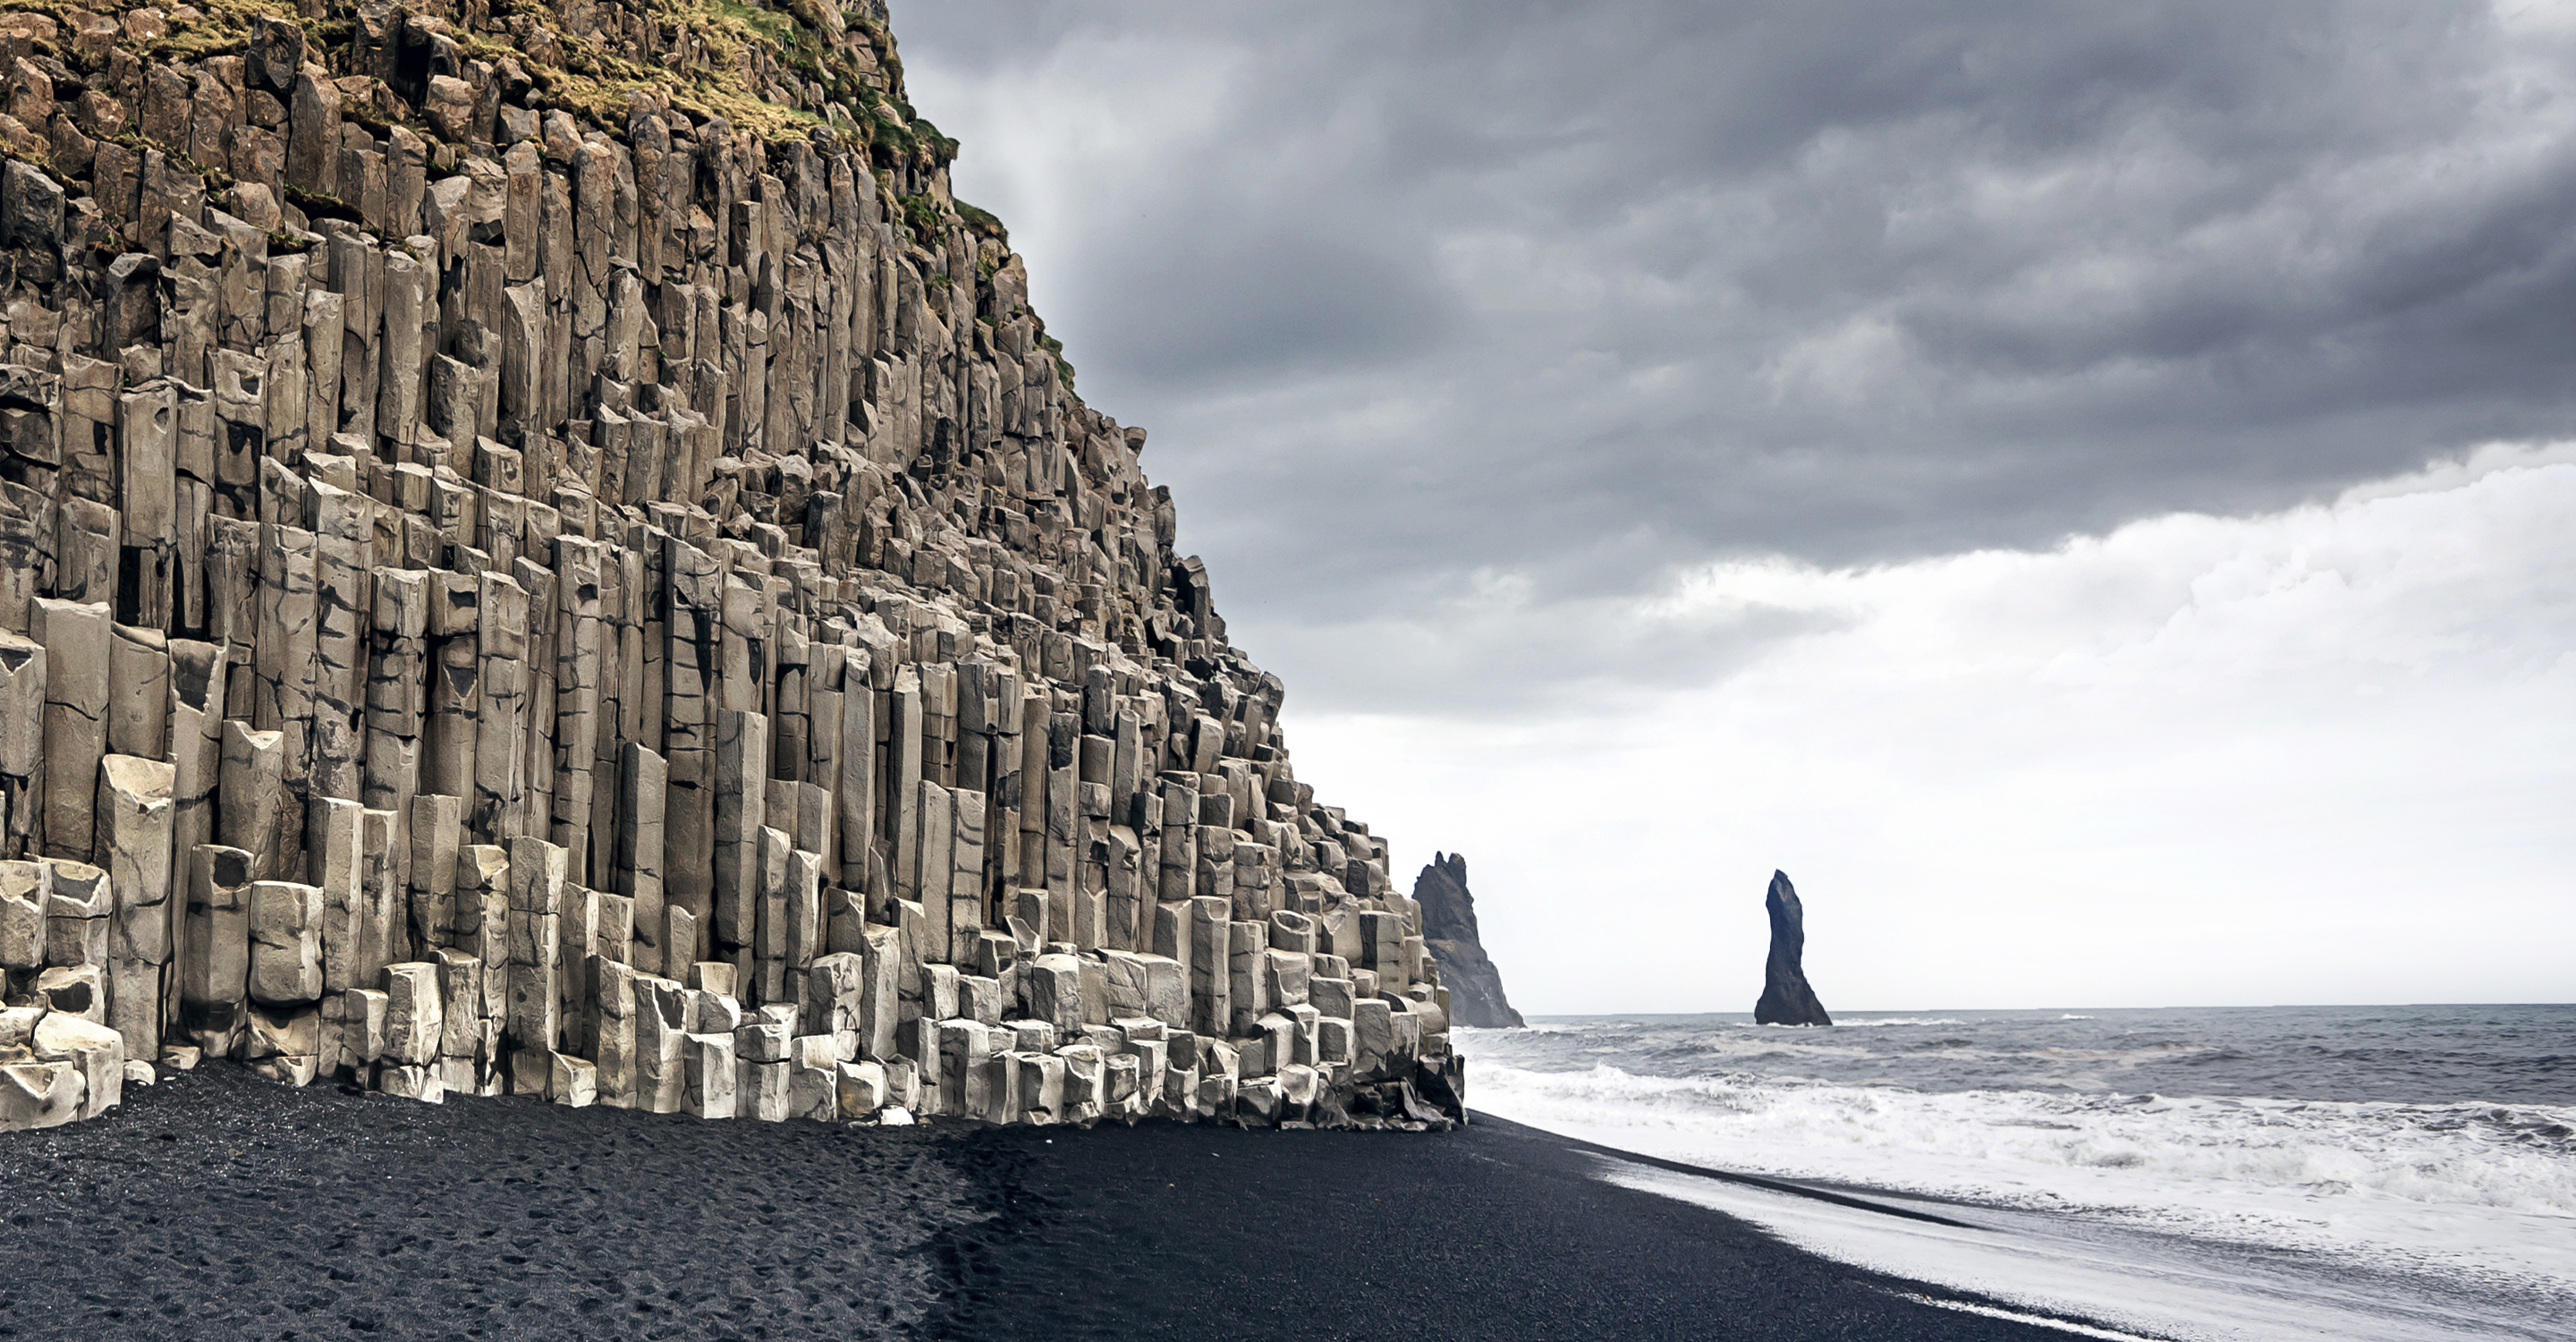 The black sand beach of Reynisfjara and the mount Reynisfjall from the Dyrholaey promontory, Iceland, Europe.